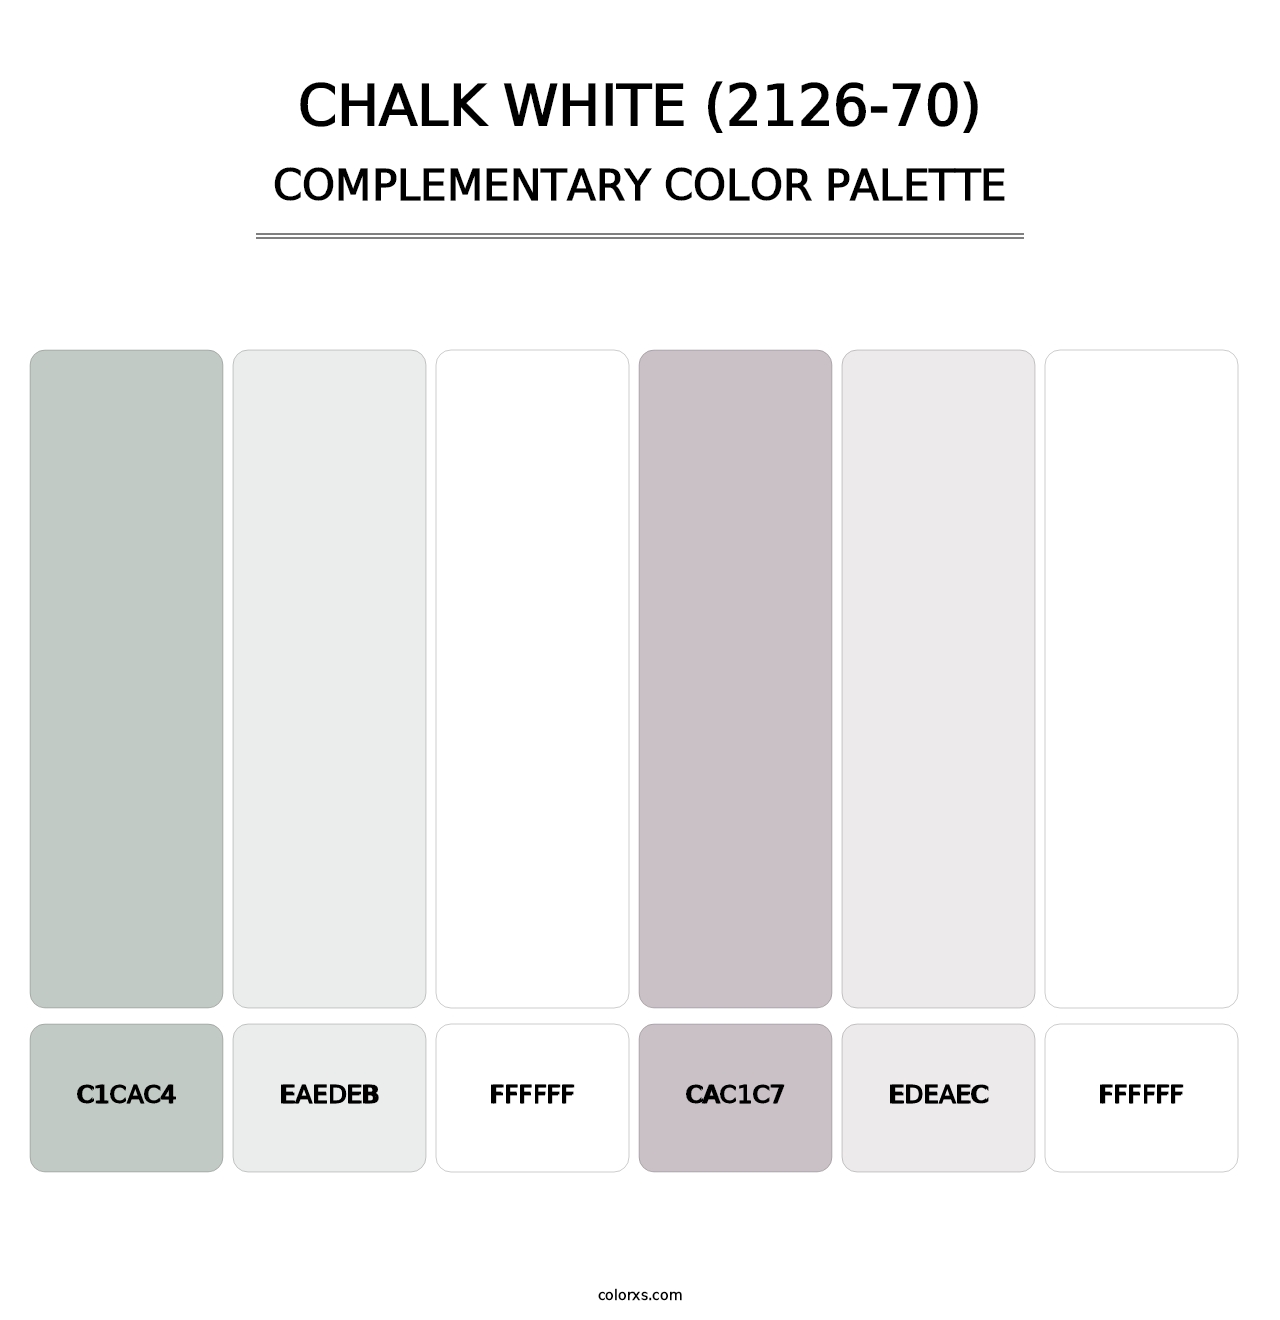 Chalk White (2126-70) - Complementary Color Palette